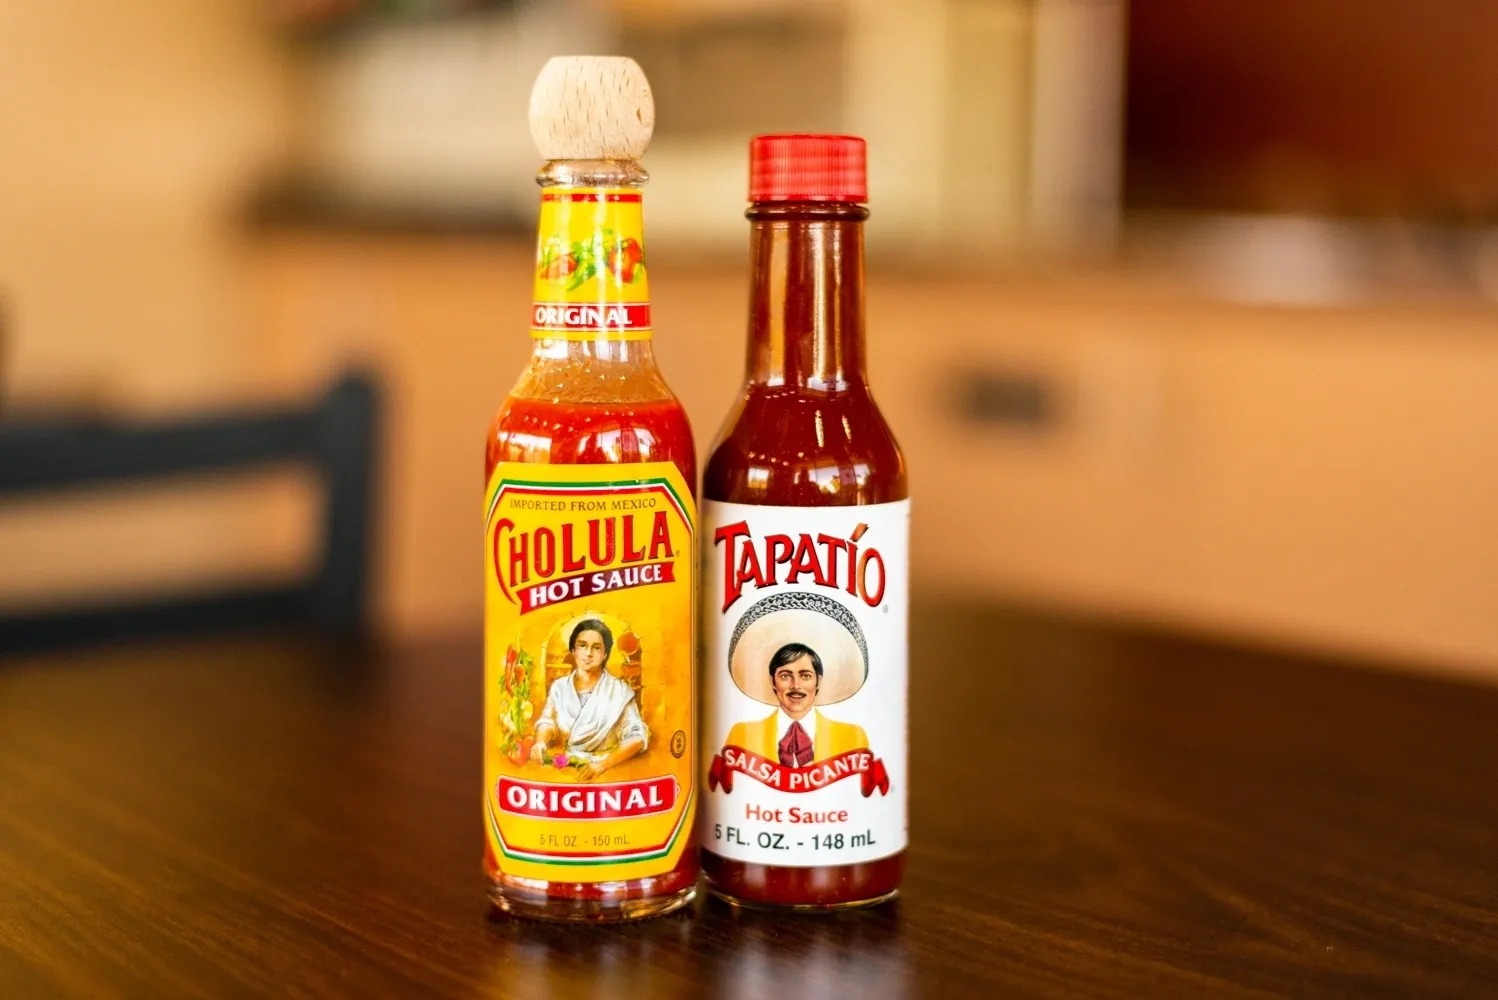 The Ultimate Showdown: Tapatio Vs Cholula - Which Mexican Hot Sauce Reigns Supreme?